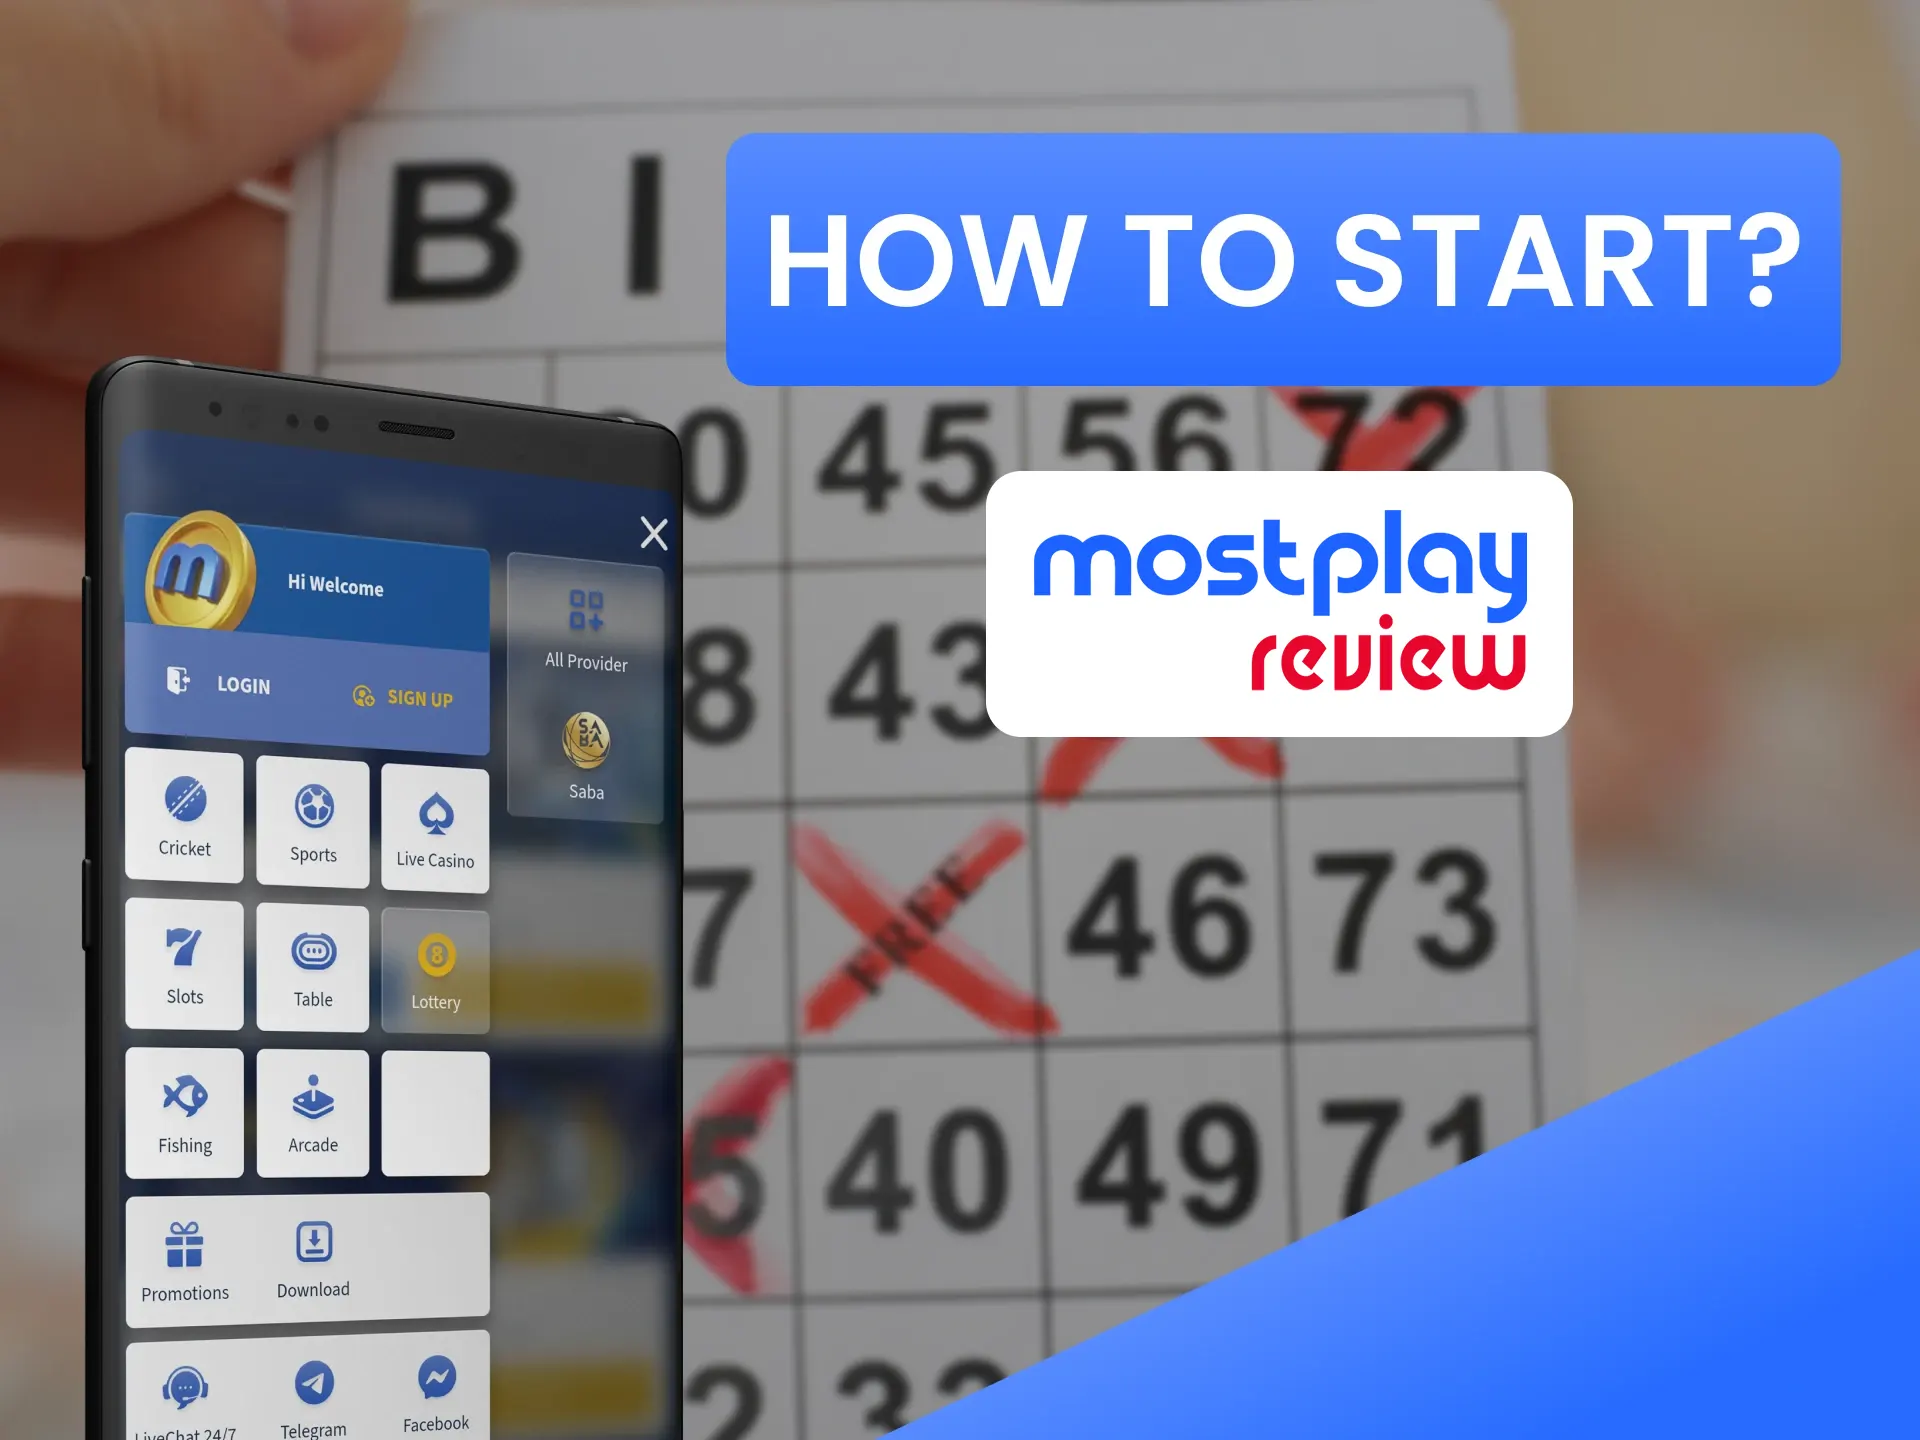 Select the section from Lottery to Mostplay.